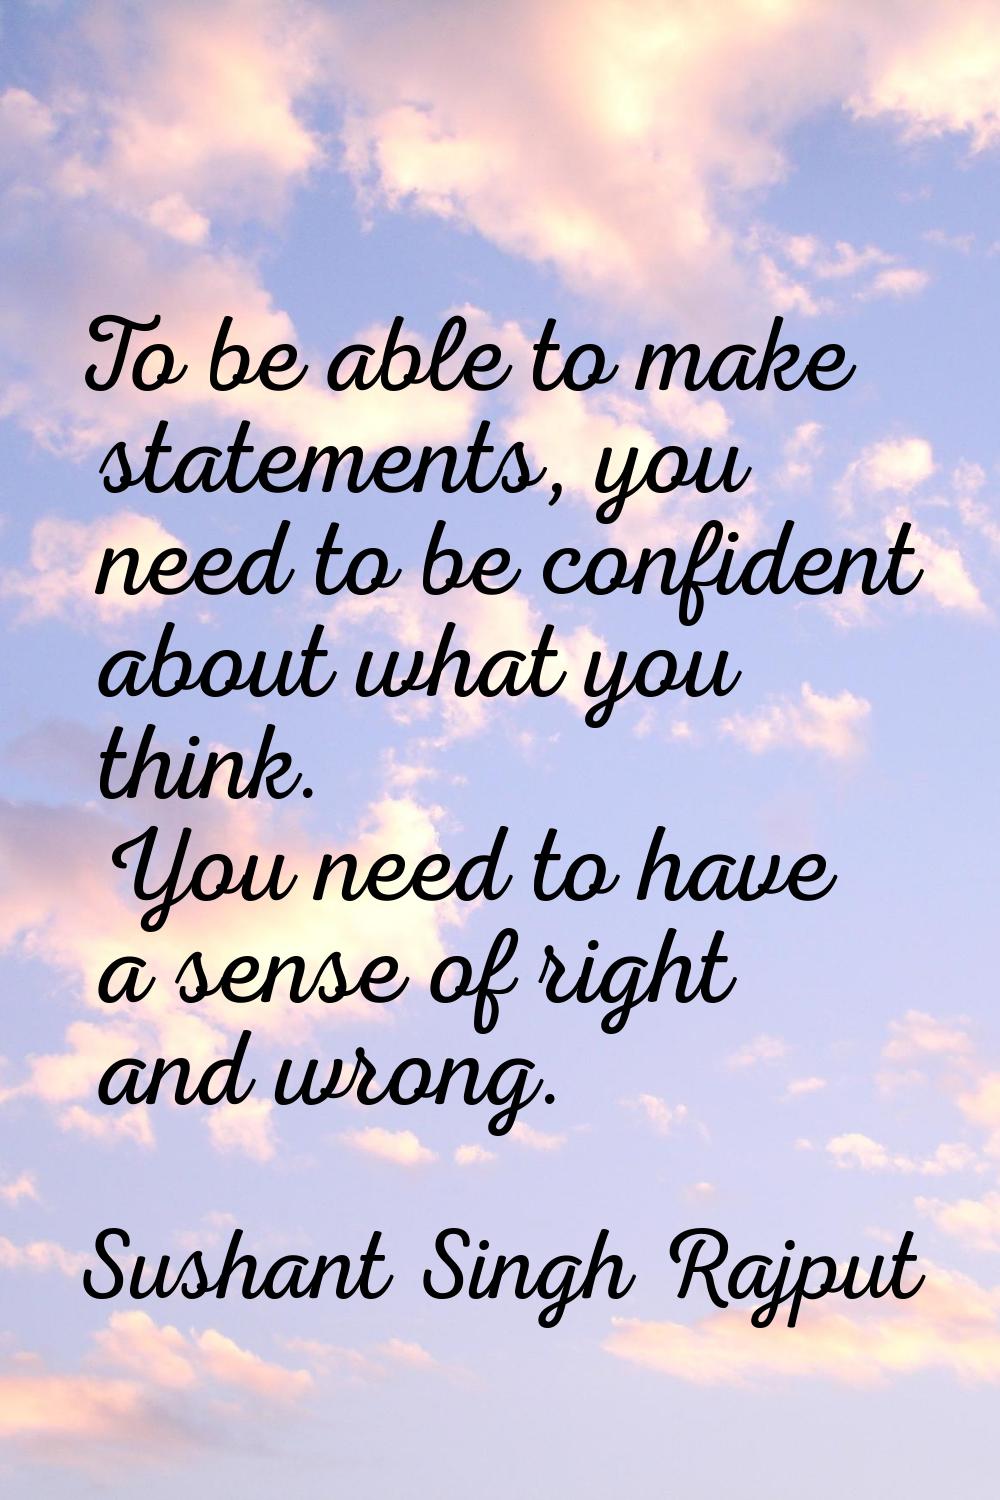 To be able to make statements, you need to be confident about what you think. You need to have a se